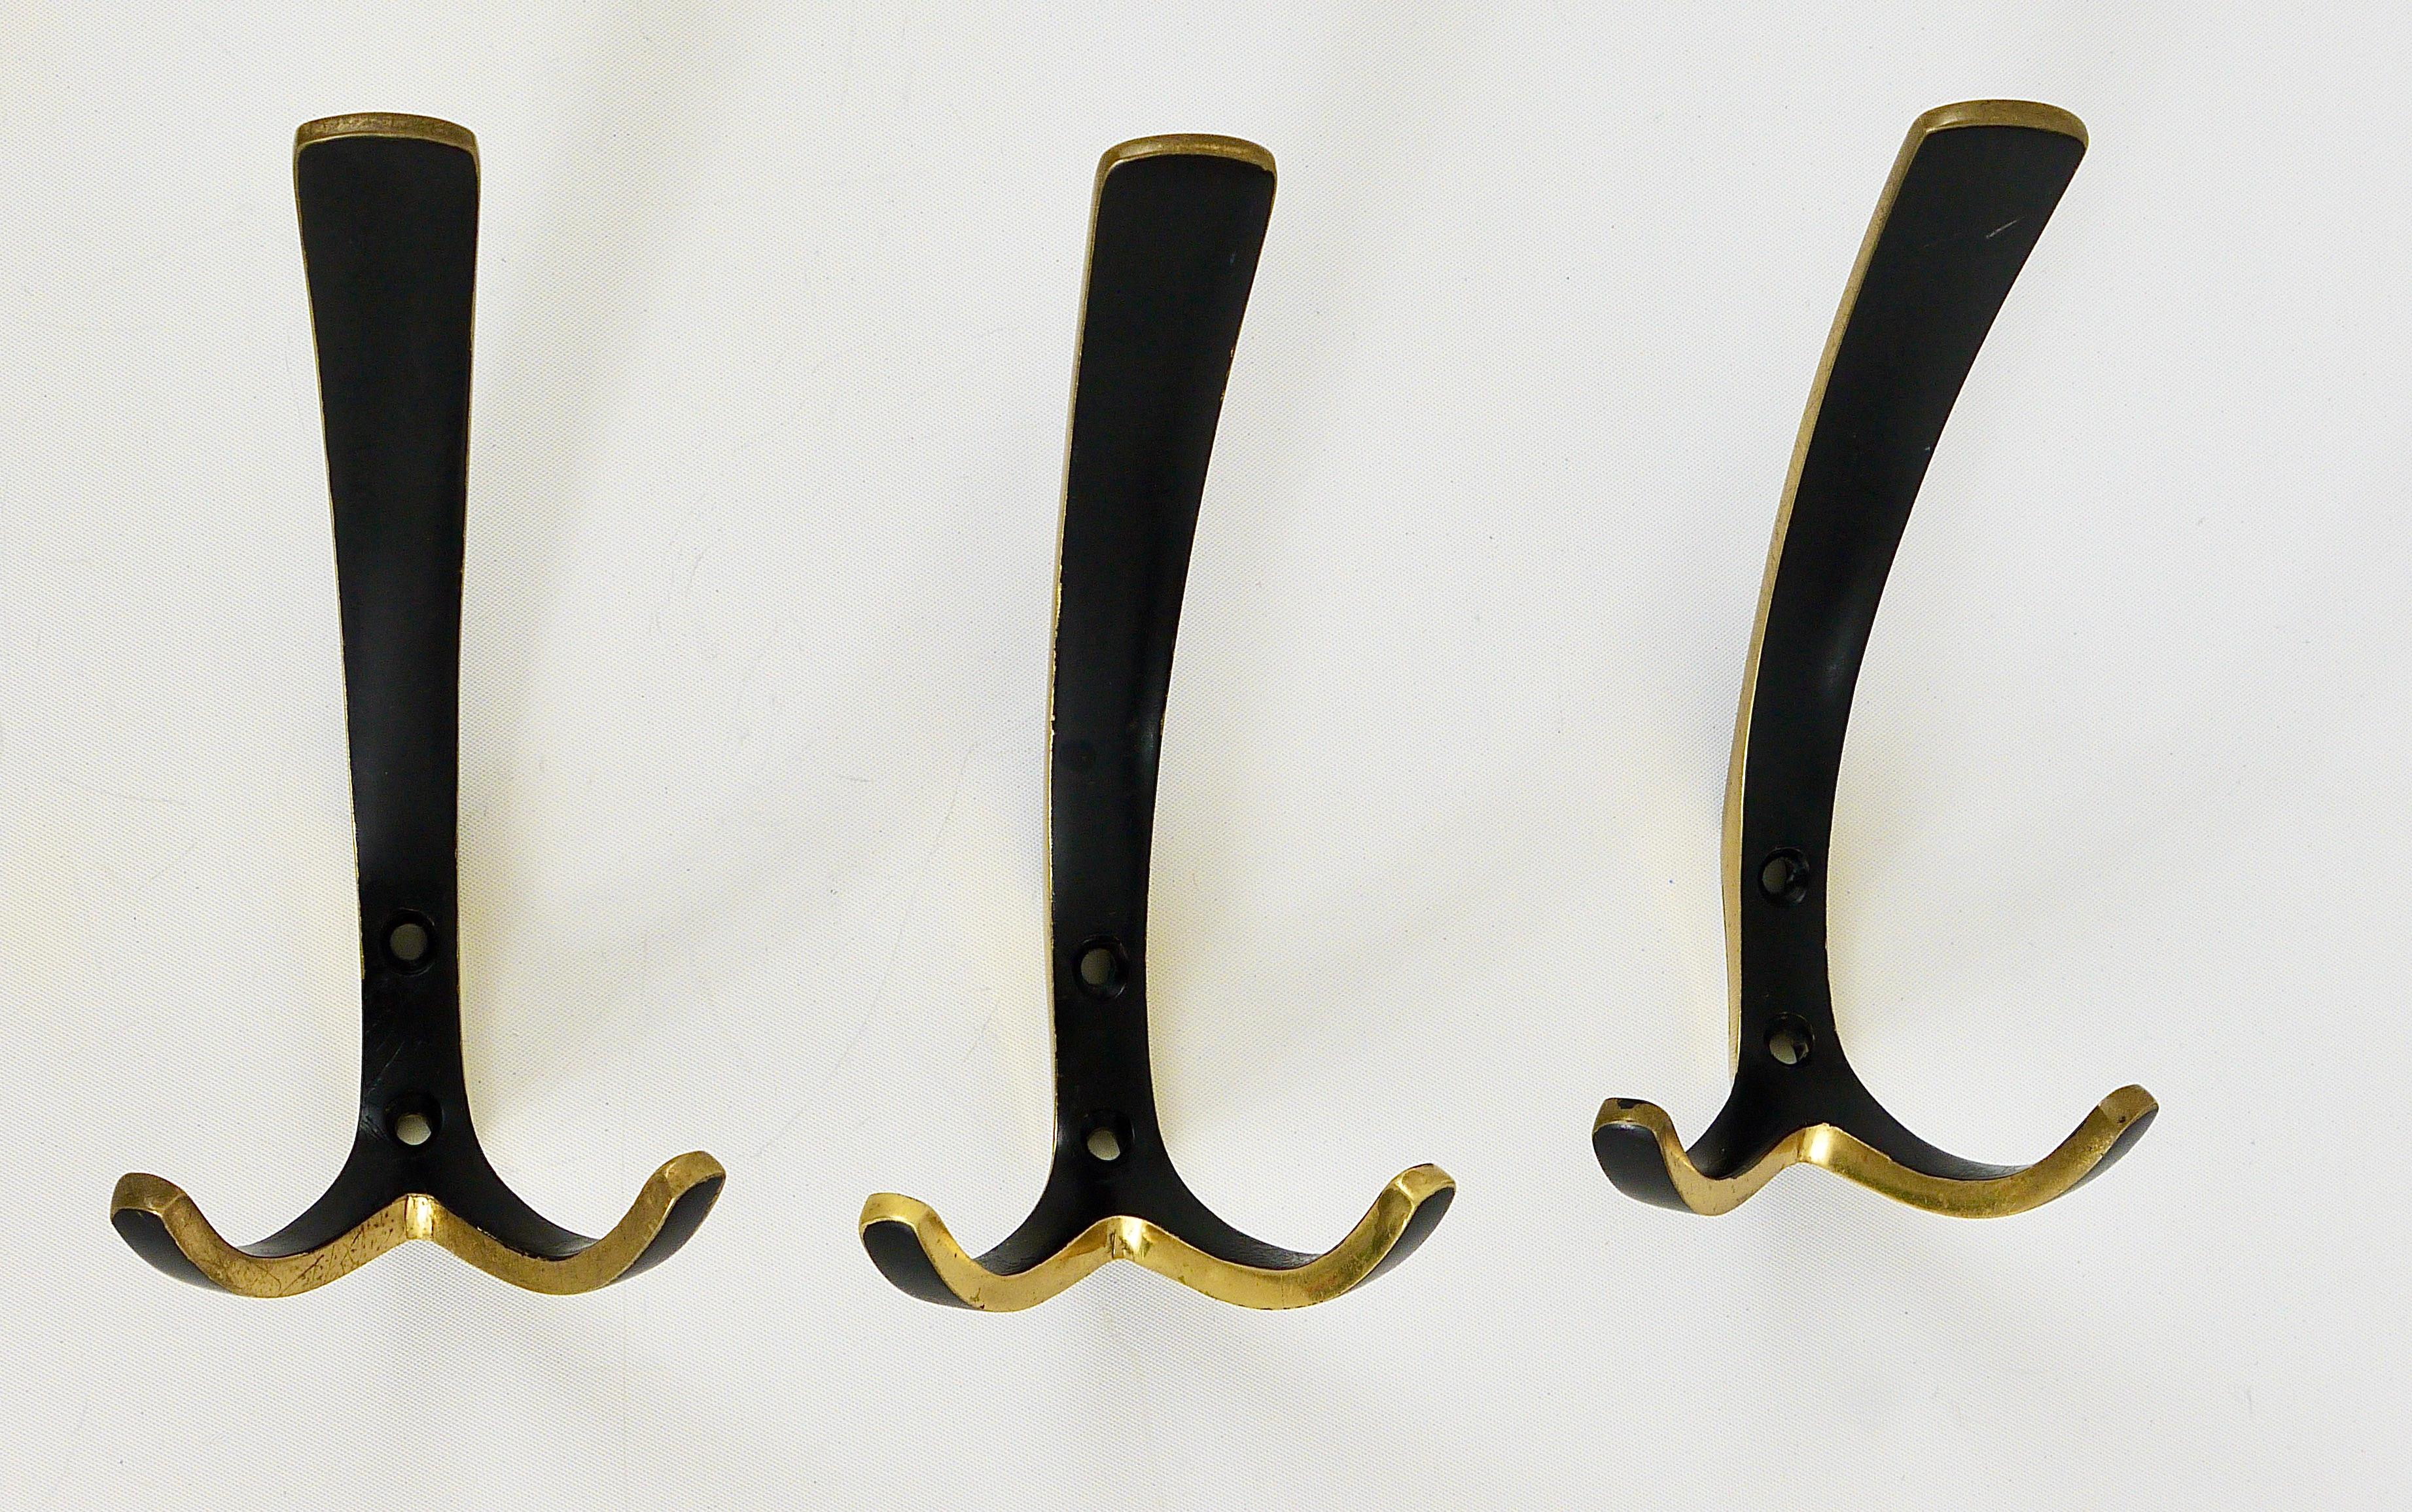 Two Midcentury Brass Double Wall Hooks by Herta Baller, Austria, 1950s For Sale 3